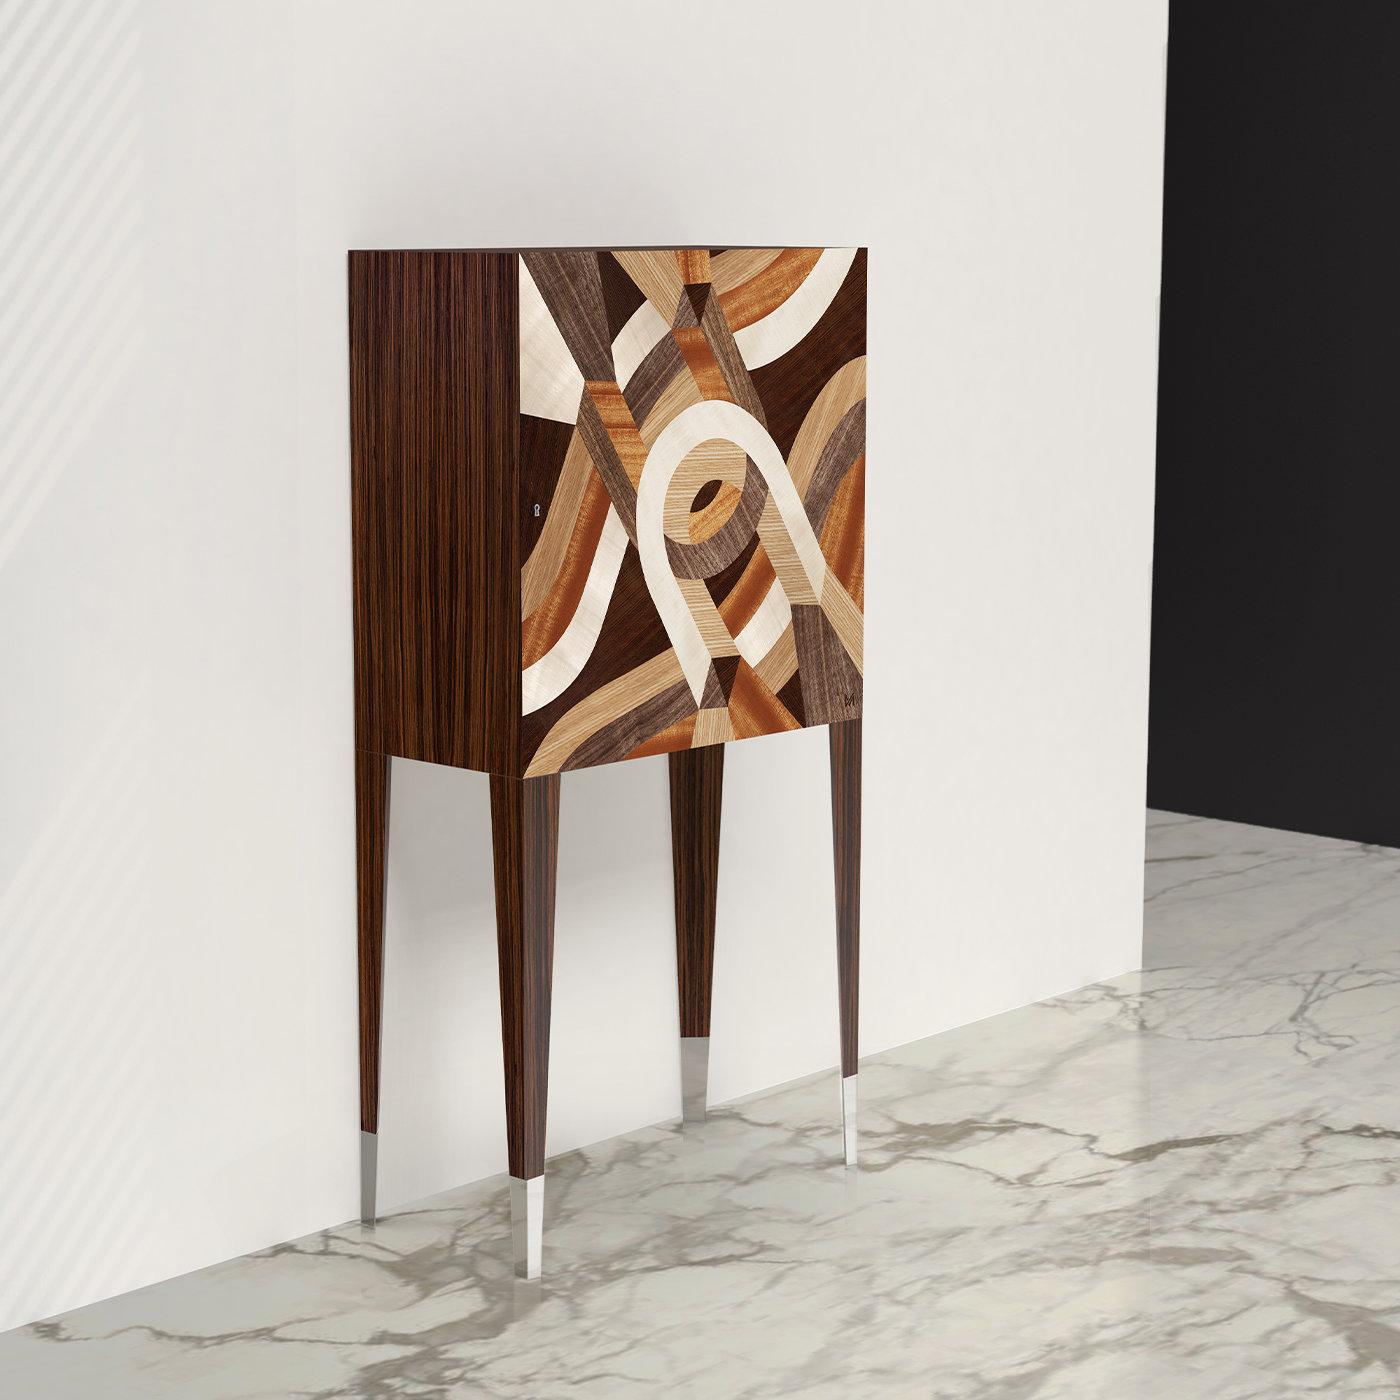 Wood becomes art in this sophisticated bar cabinet that embodies Marzia Boaglio's crafting and luxurious style. The rectangular rosewood frame is supported by tall and slender legs with polished steel feet, the top unit showcasing a door with an